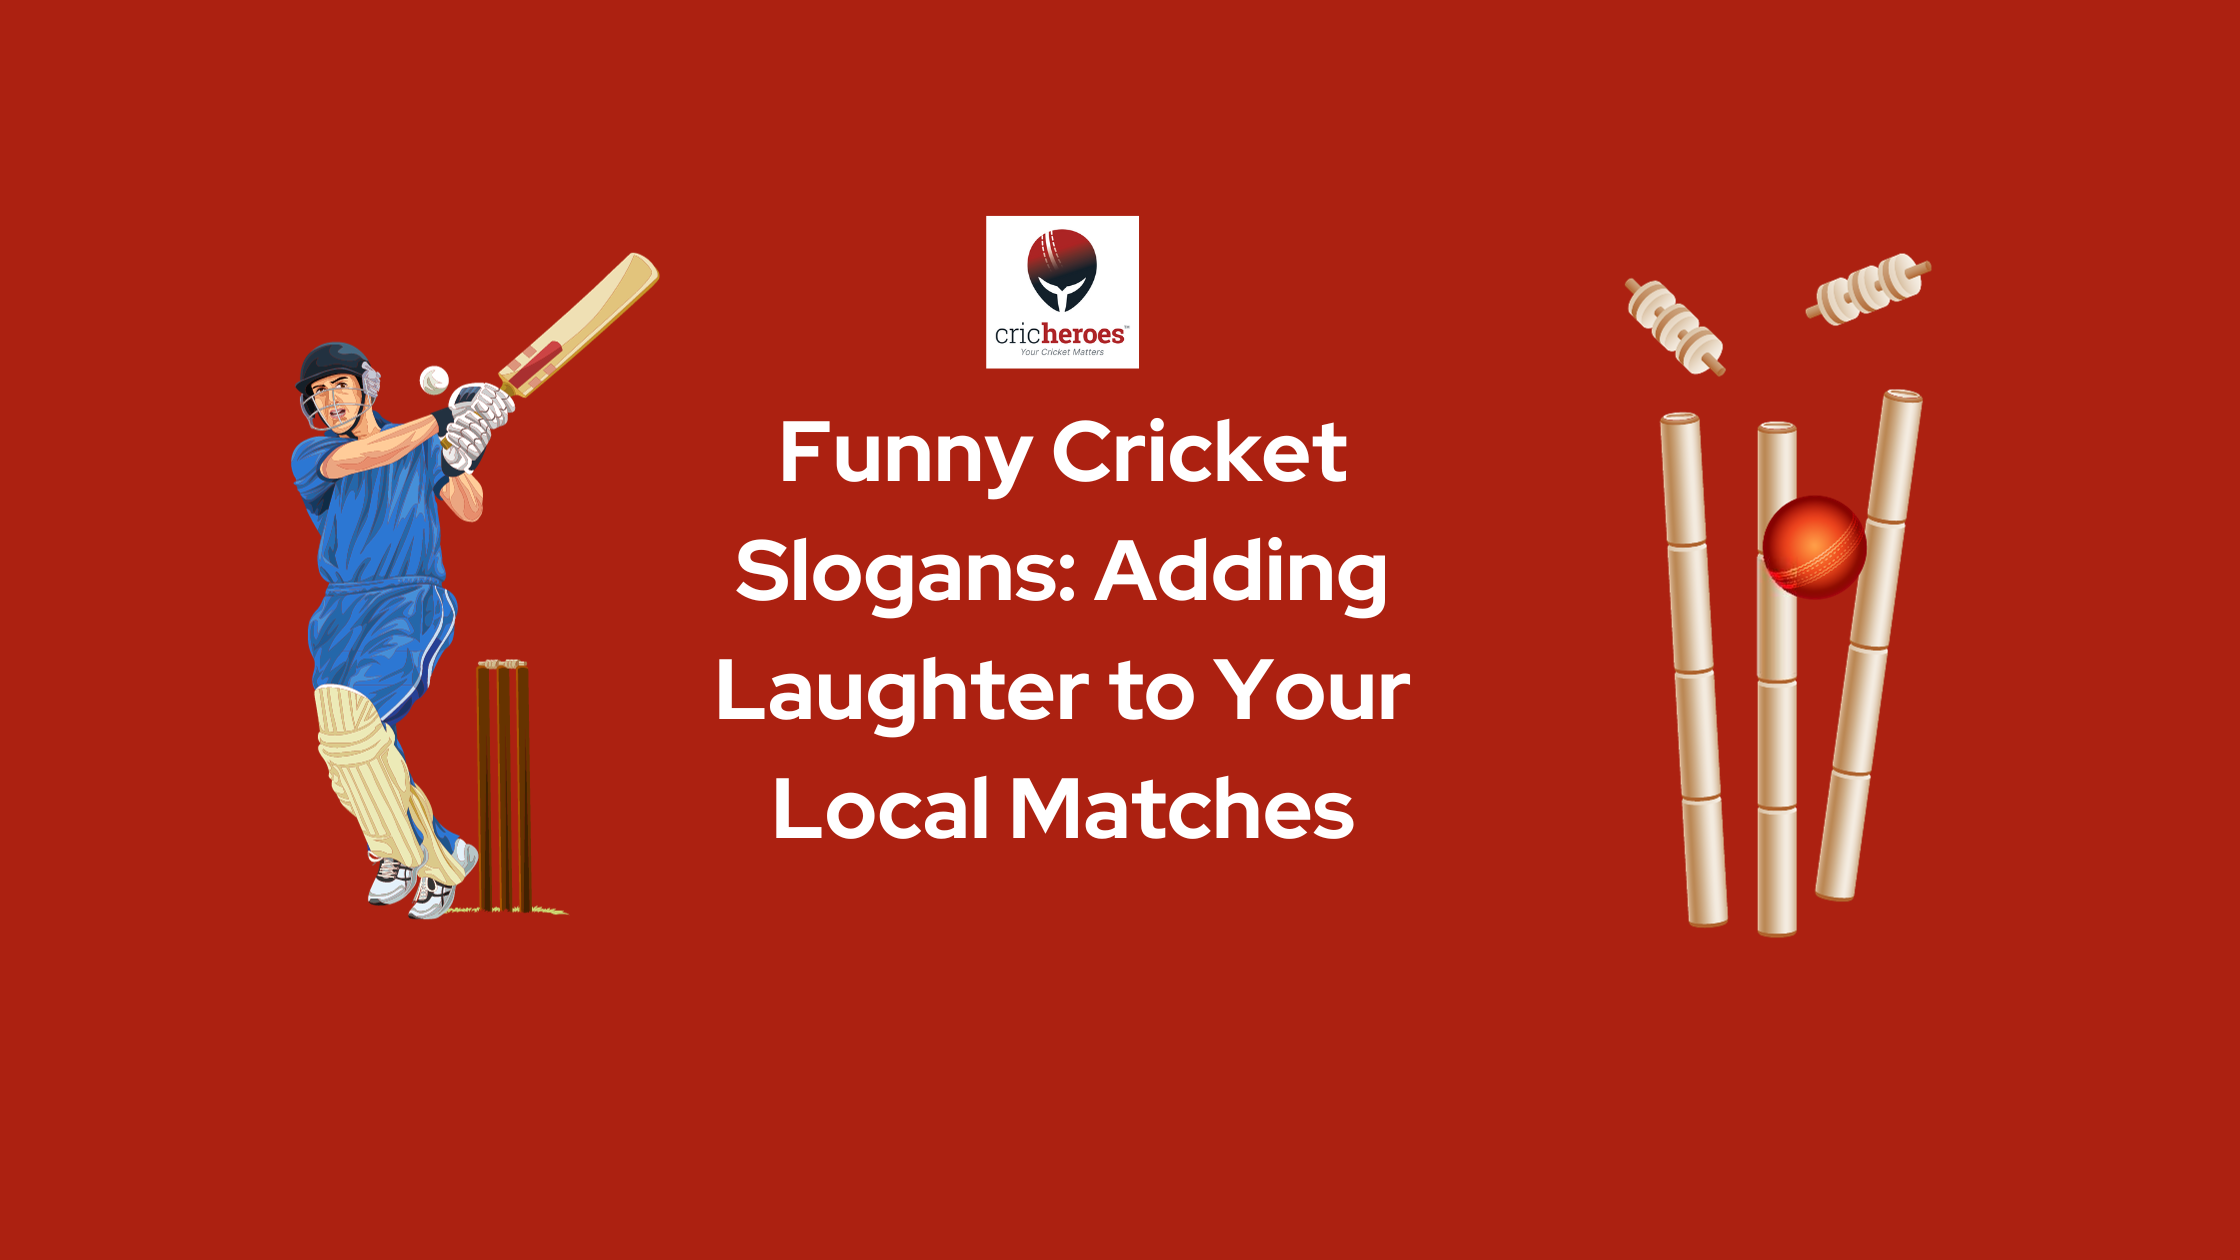 Funny Cricket Slogans: Adding Laughter to Your Local Matches